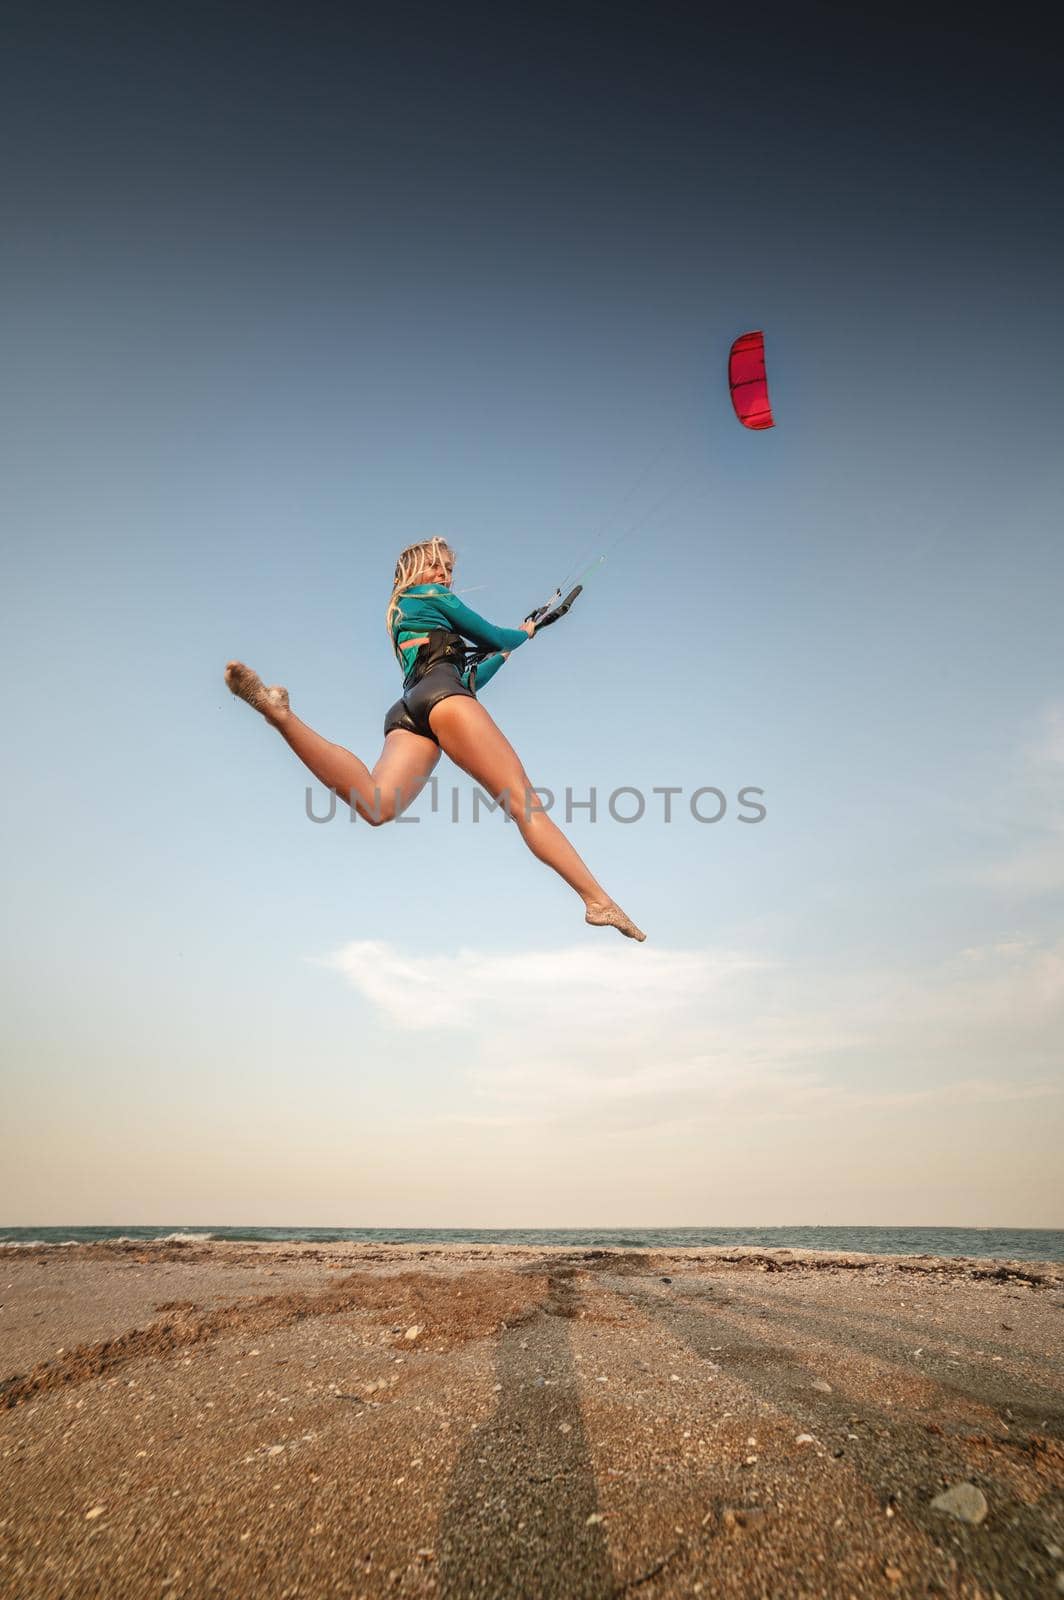 Sportswoman kitesurfer jumps with her kite on the beach. Free flight over land with a kite by yanik88